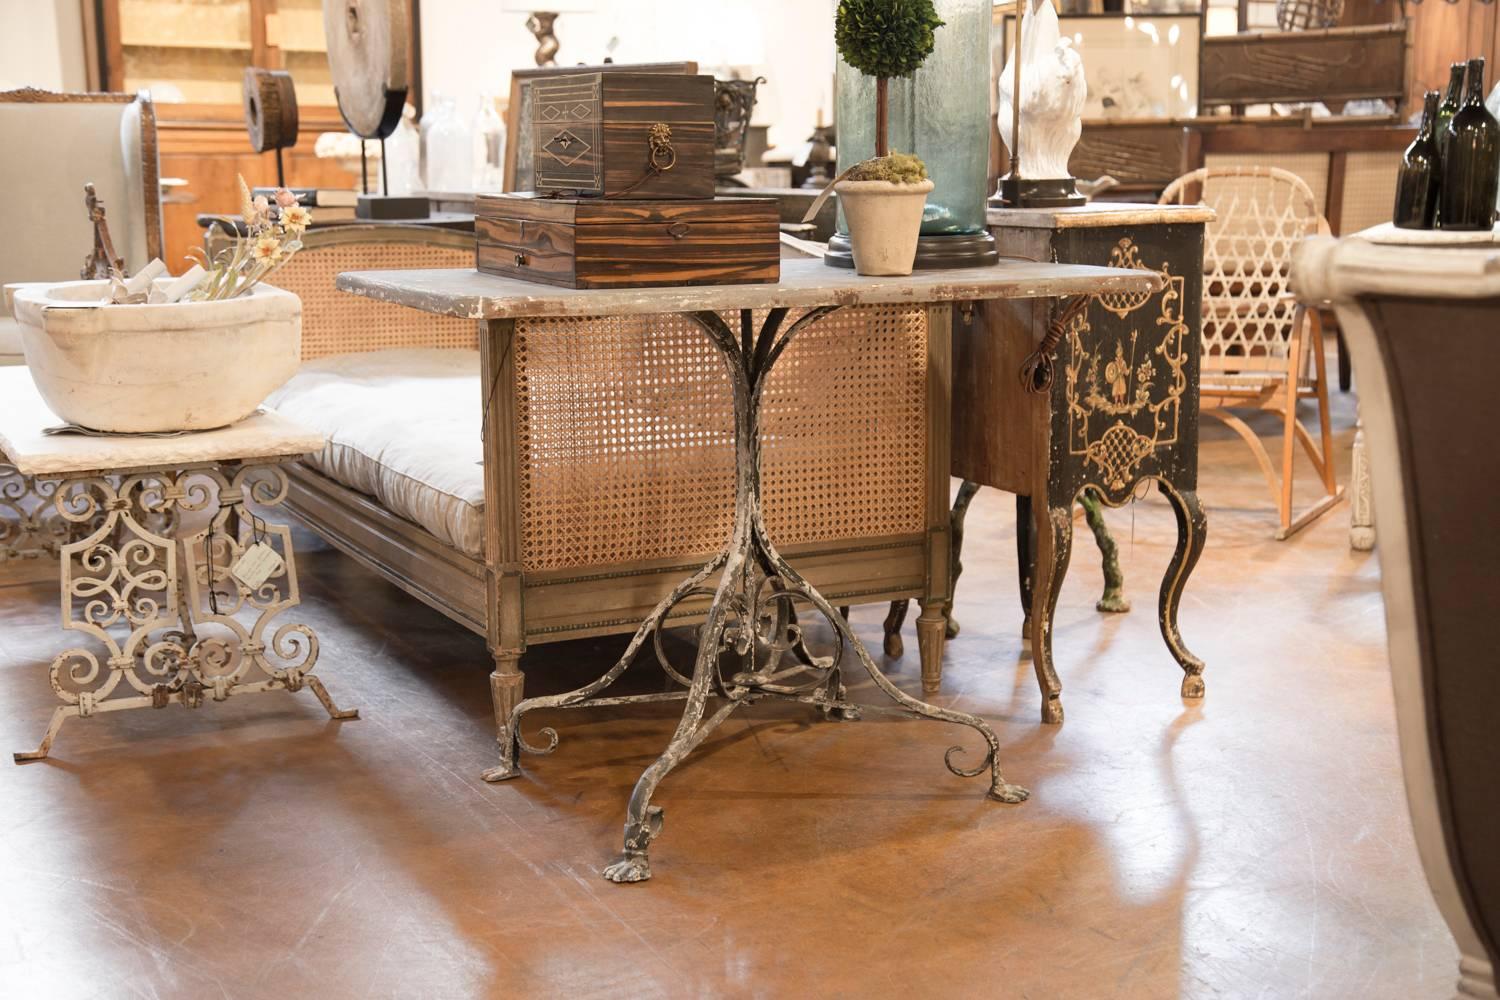 This French garden table with unusual rectangular top from the early 20th century was born in Arras, a city located in Northern France. The table is supported by a palm-tree shaped base at the top, ending its course gracefully with a quadripod base,